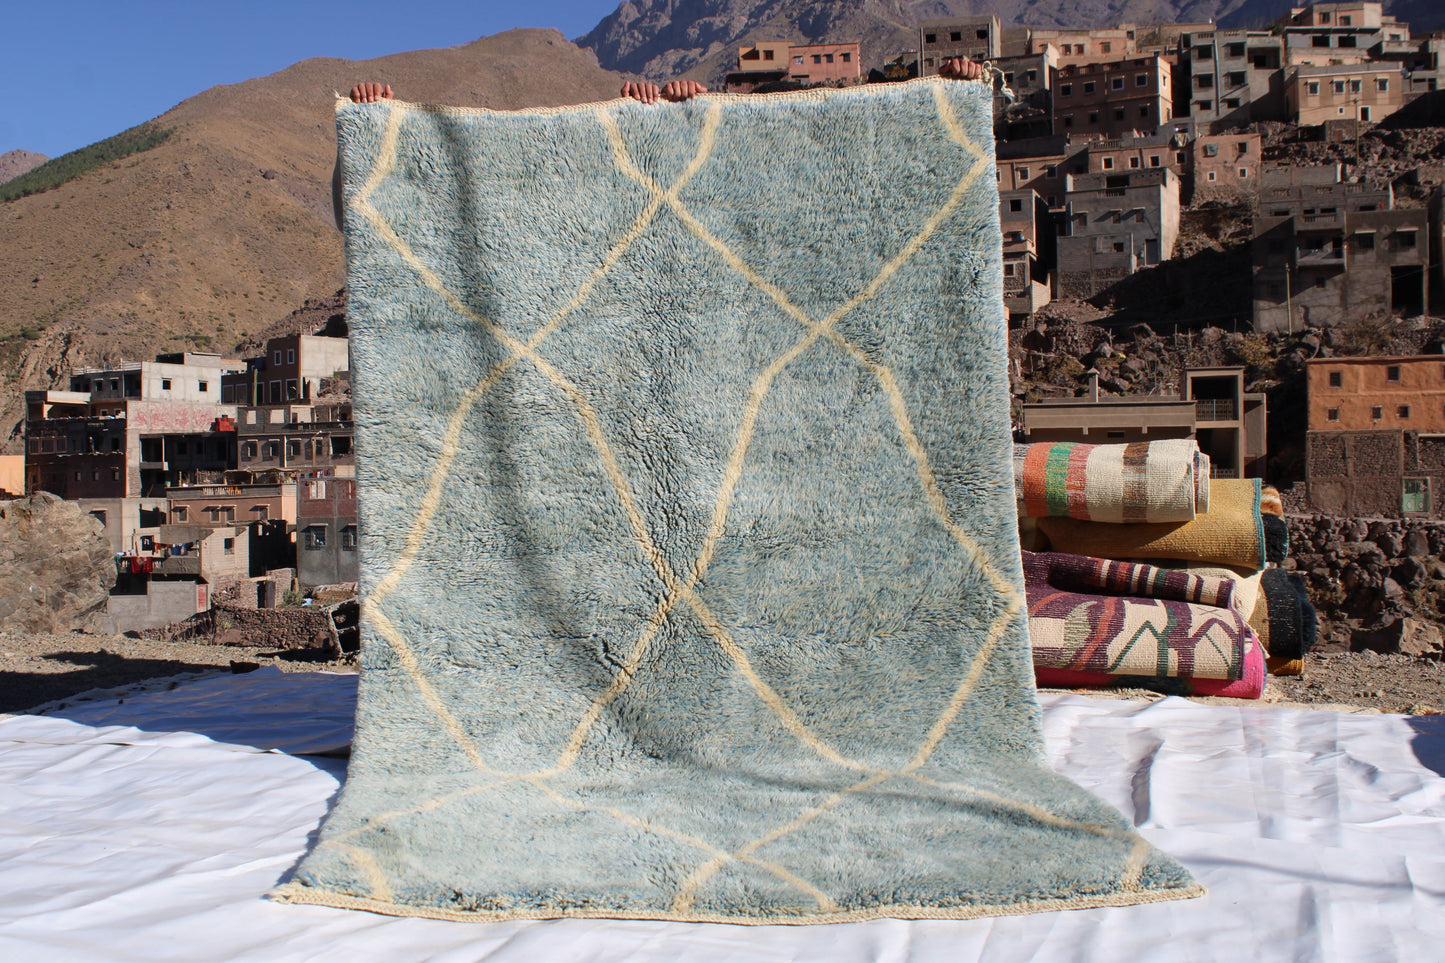 Beni Ourain rugs originate from the Atlas Mountains of Morocco and are characterized by their distinctive, neutral-toned, and geometric designs. These handwoven rugs often feature a plush pile and are made by the Berber tribes,  size is 260x160 cm